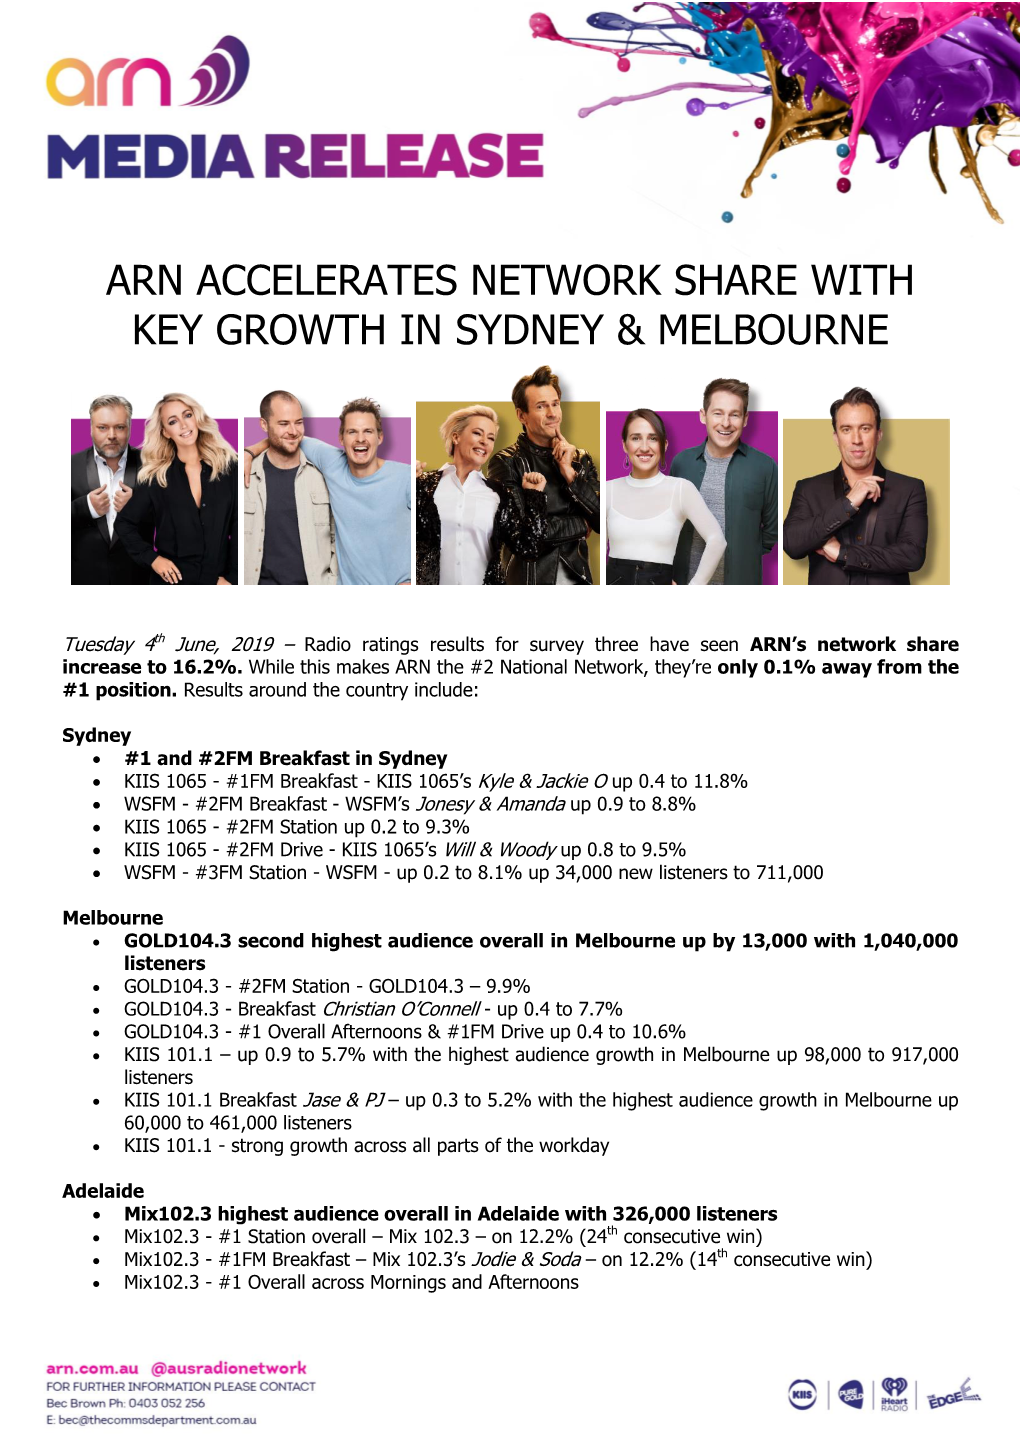 Arn Accelerates Network Share with Key Growth in Sydney & Melbourne